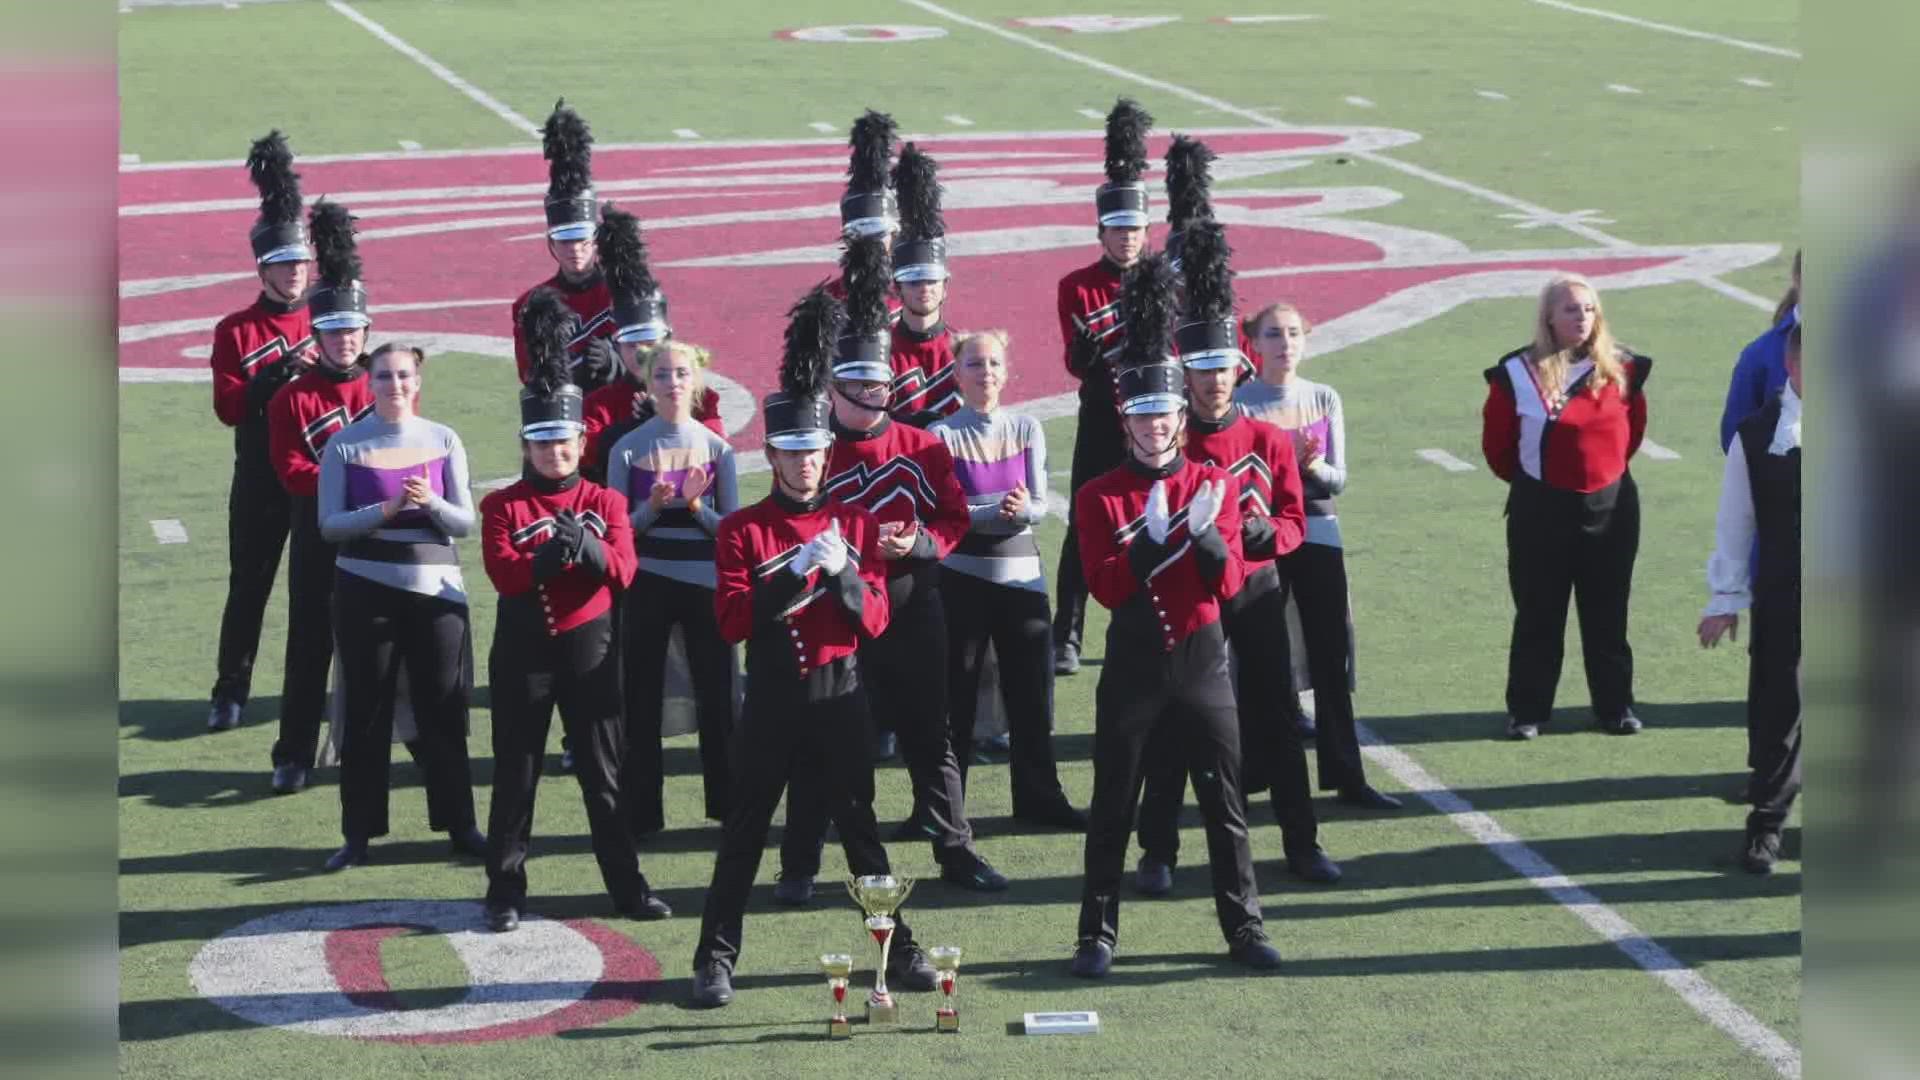 The Bobcat Band is now No. 1 among 17 different schools across East Tennessee. They brought home four awards from the Alcoa Marchin Band Festival.